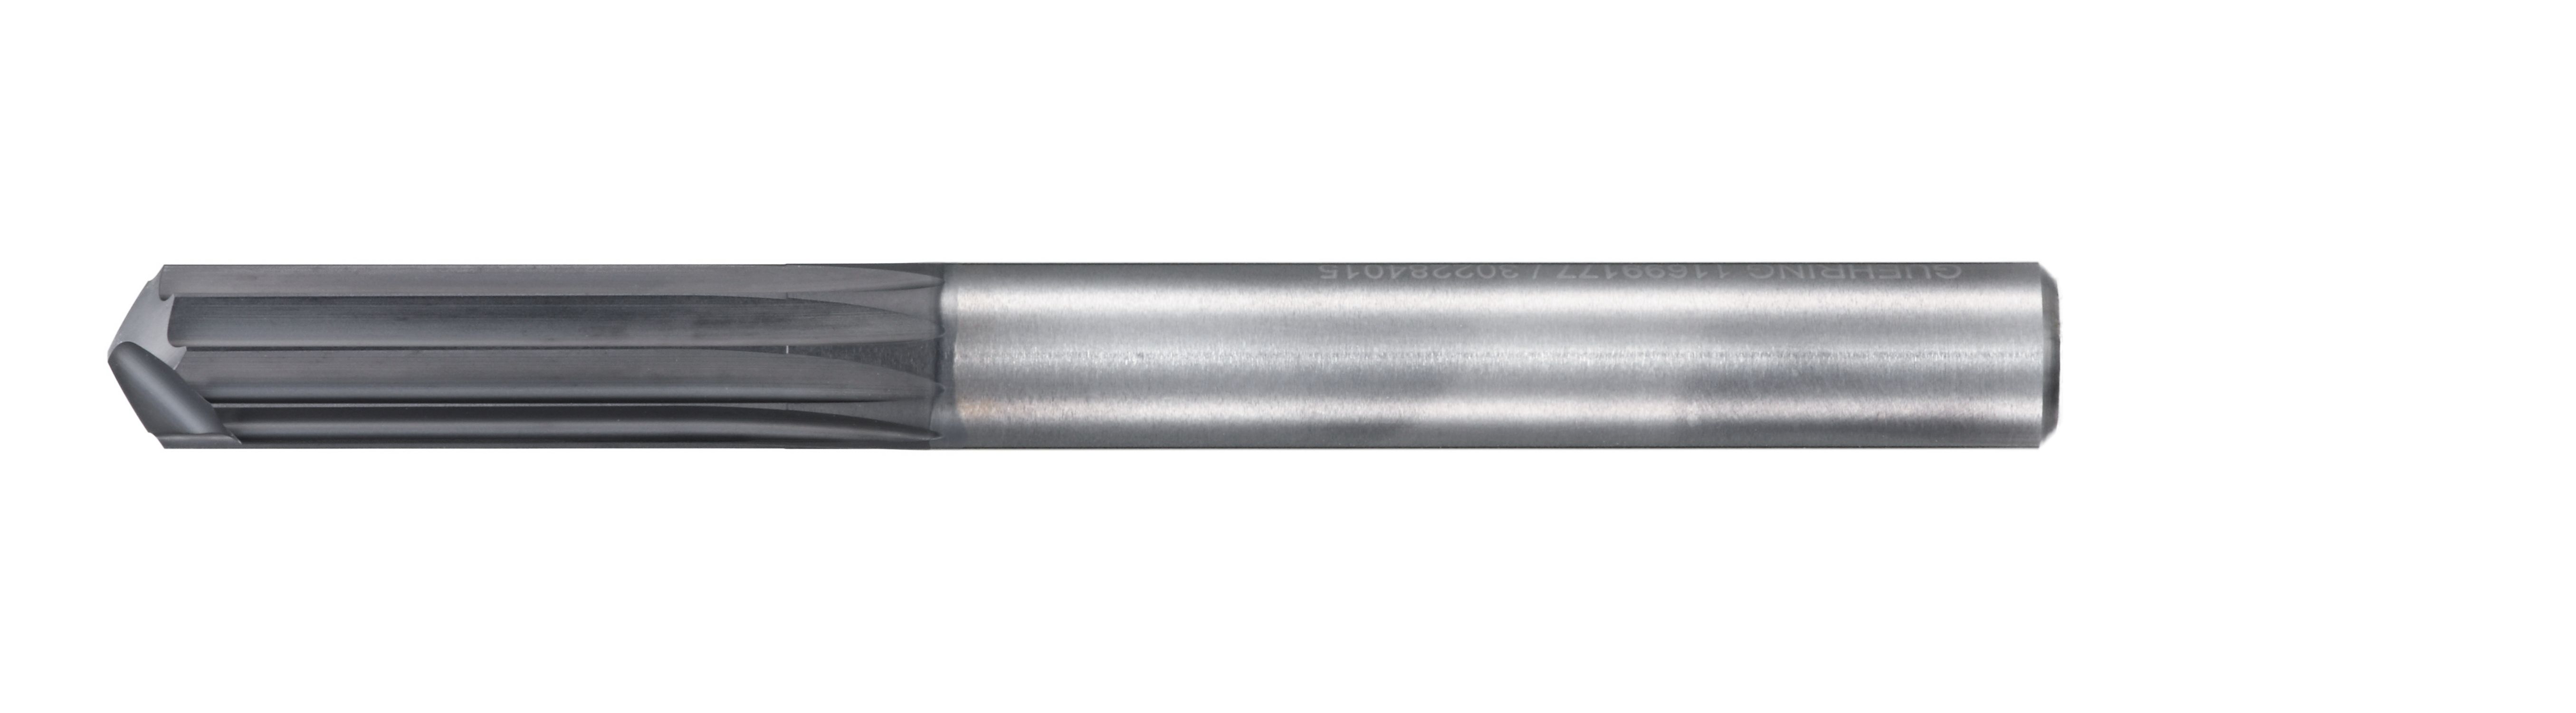 Grooving/Shouldering Multi-Flute End Mill for CFRP with Drill Point CR100 6720 6720-004.000